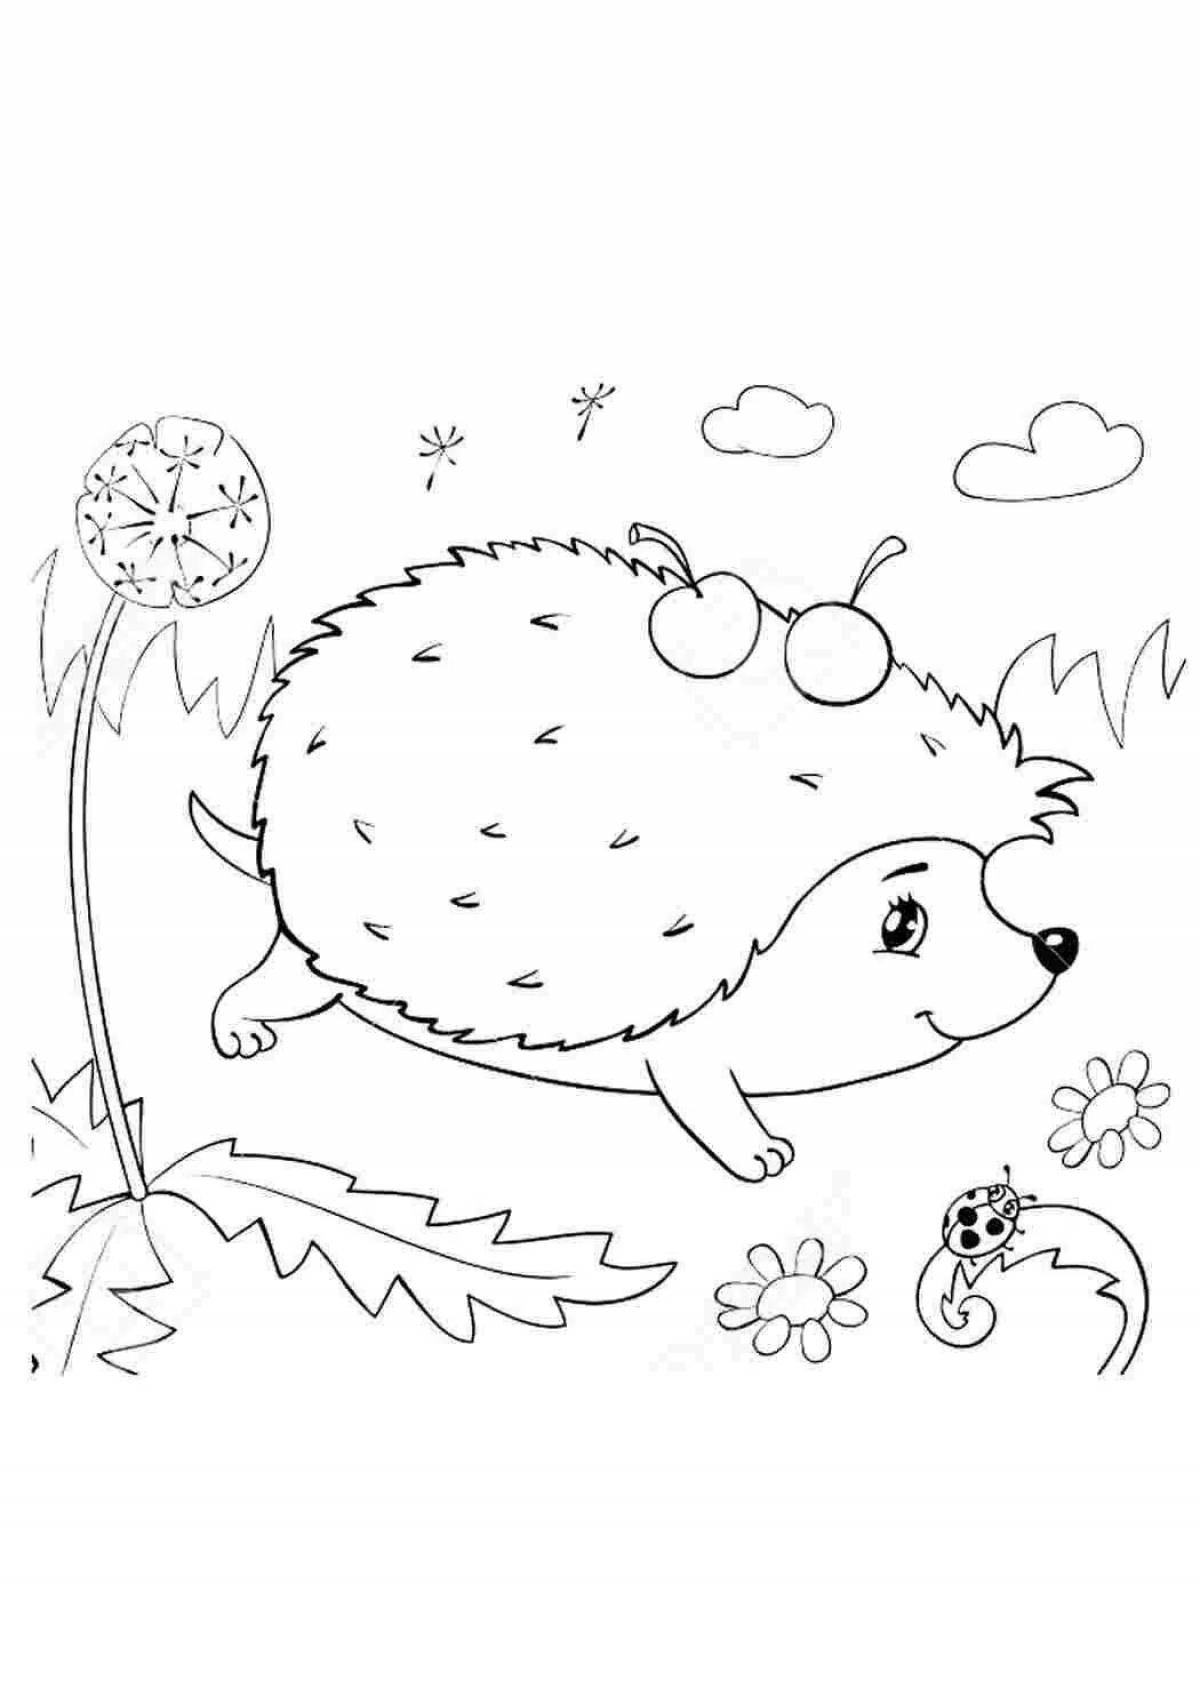 Drawing of a cheerful hedgehog